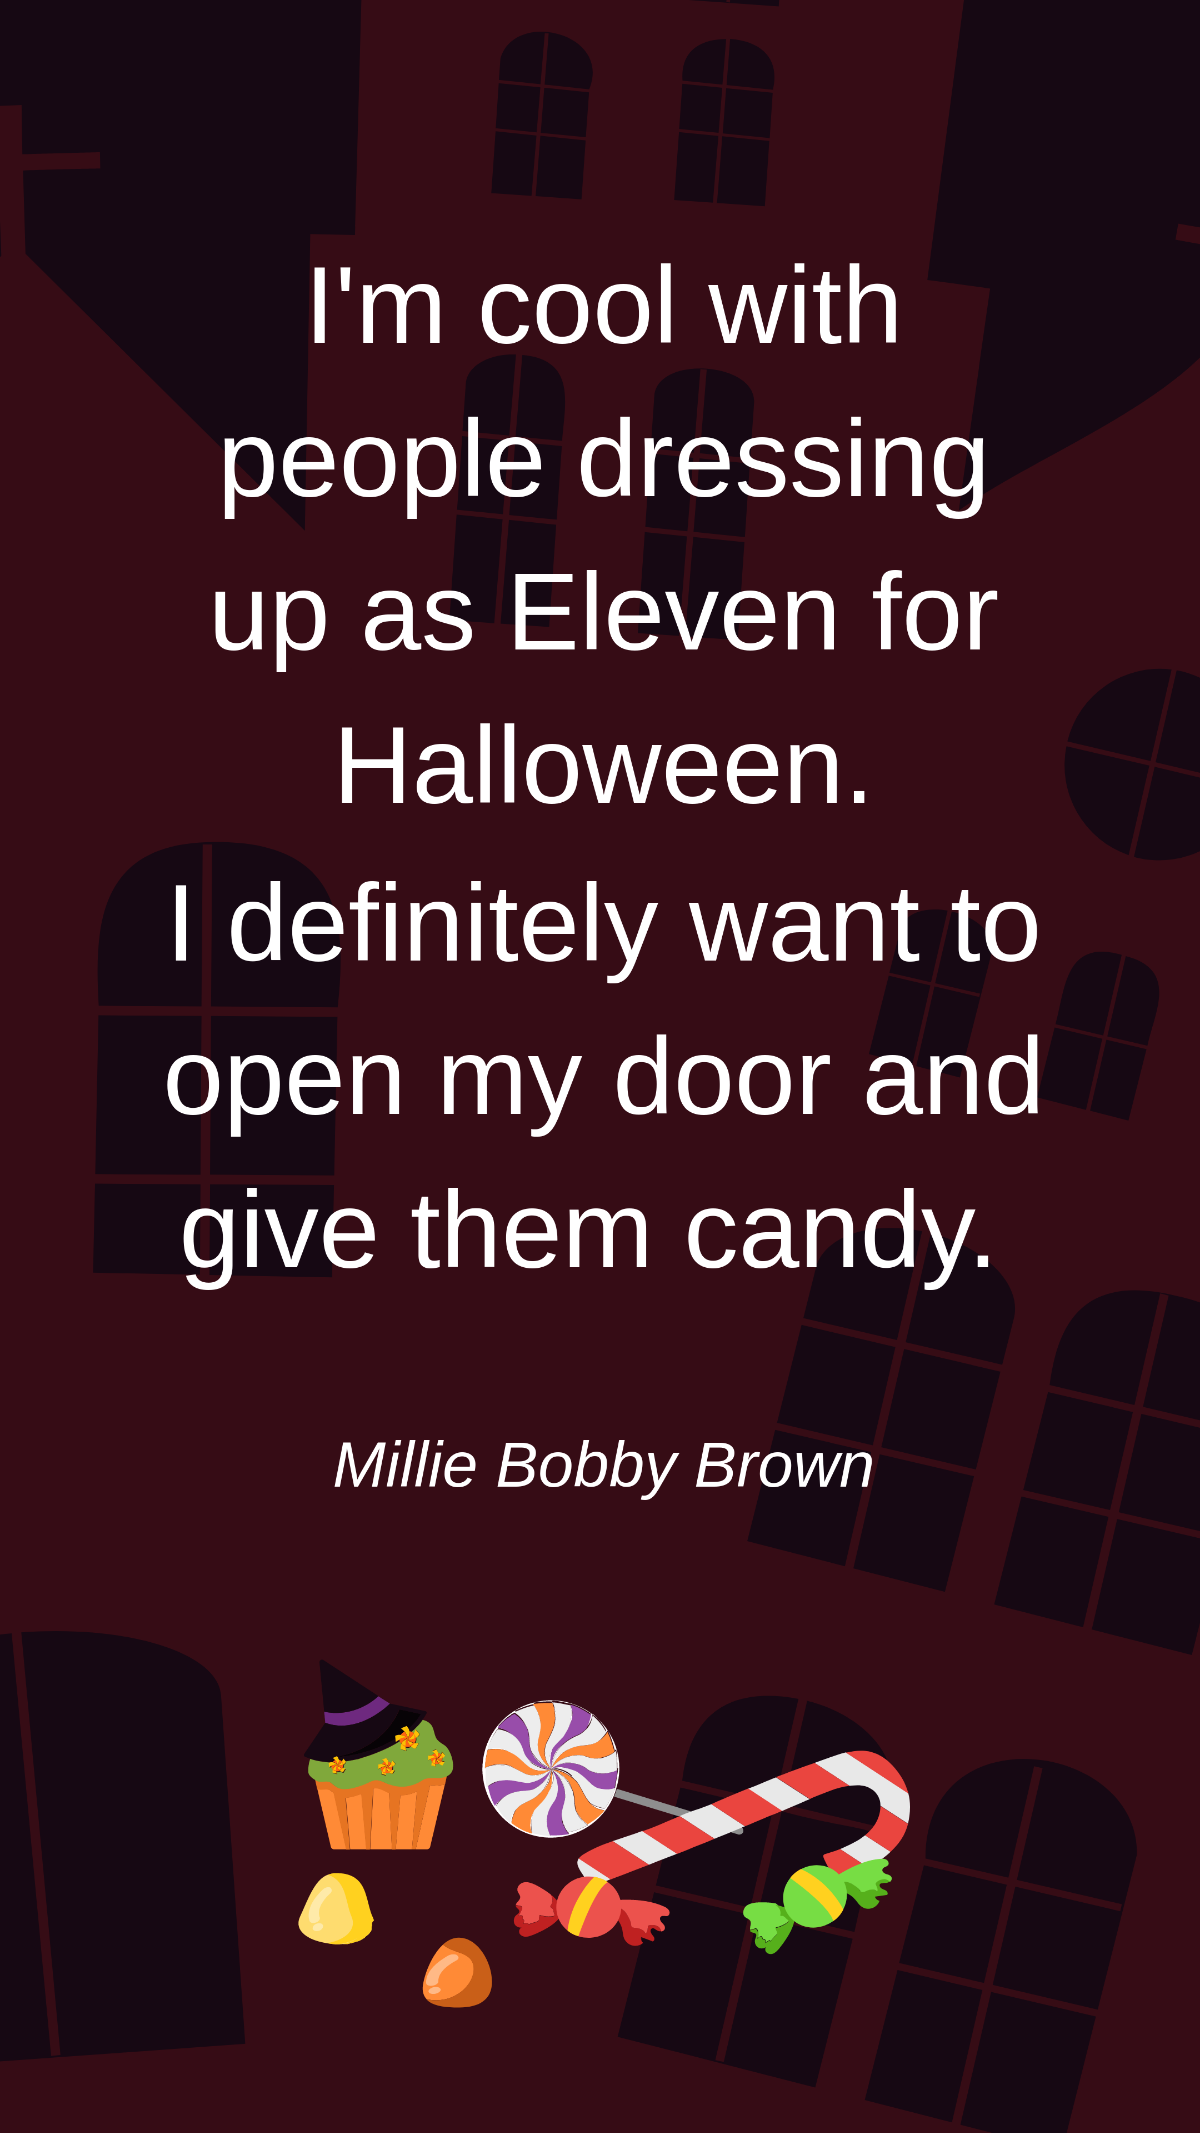 Millie Bobby Brown - I'm cool with people dressing up as Eleven for Halloween. I definitely want to open my door and give them candy. Template